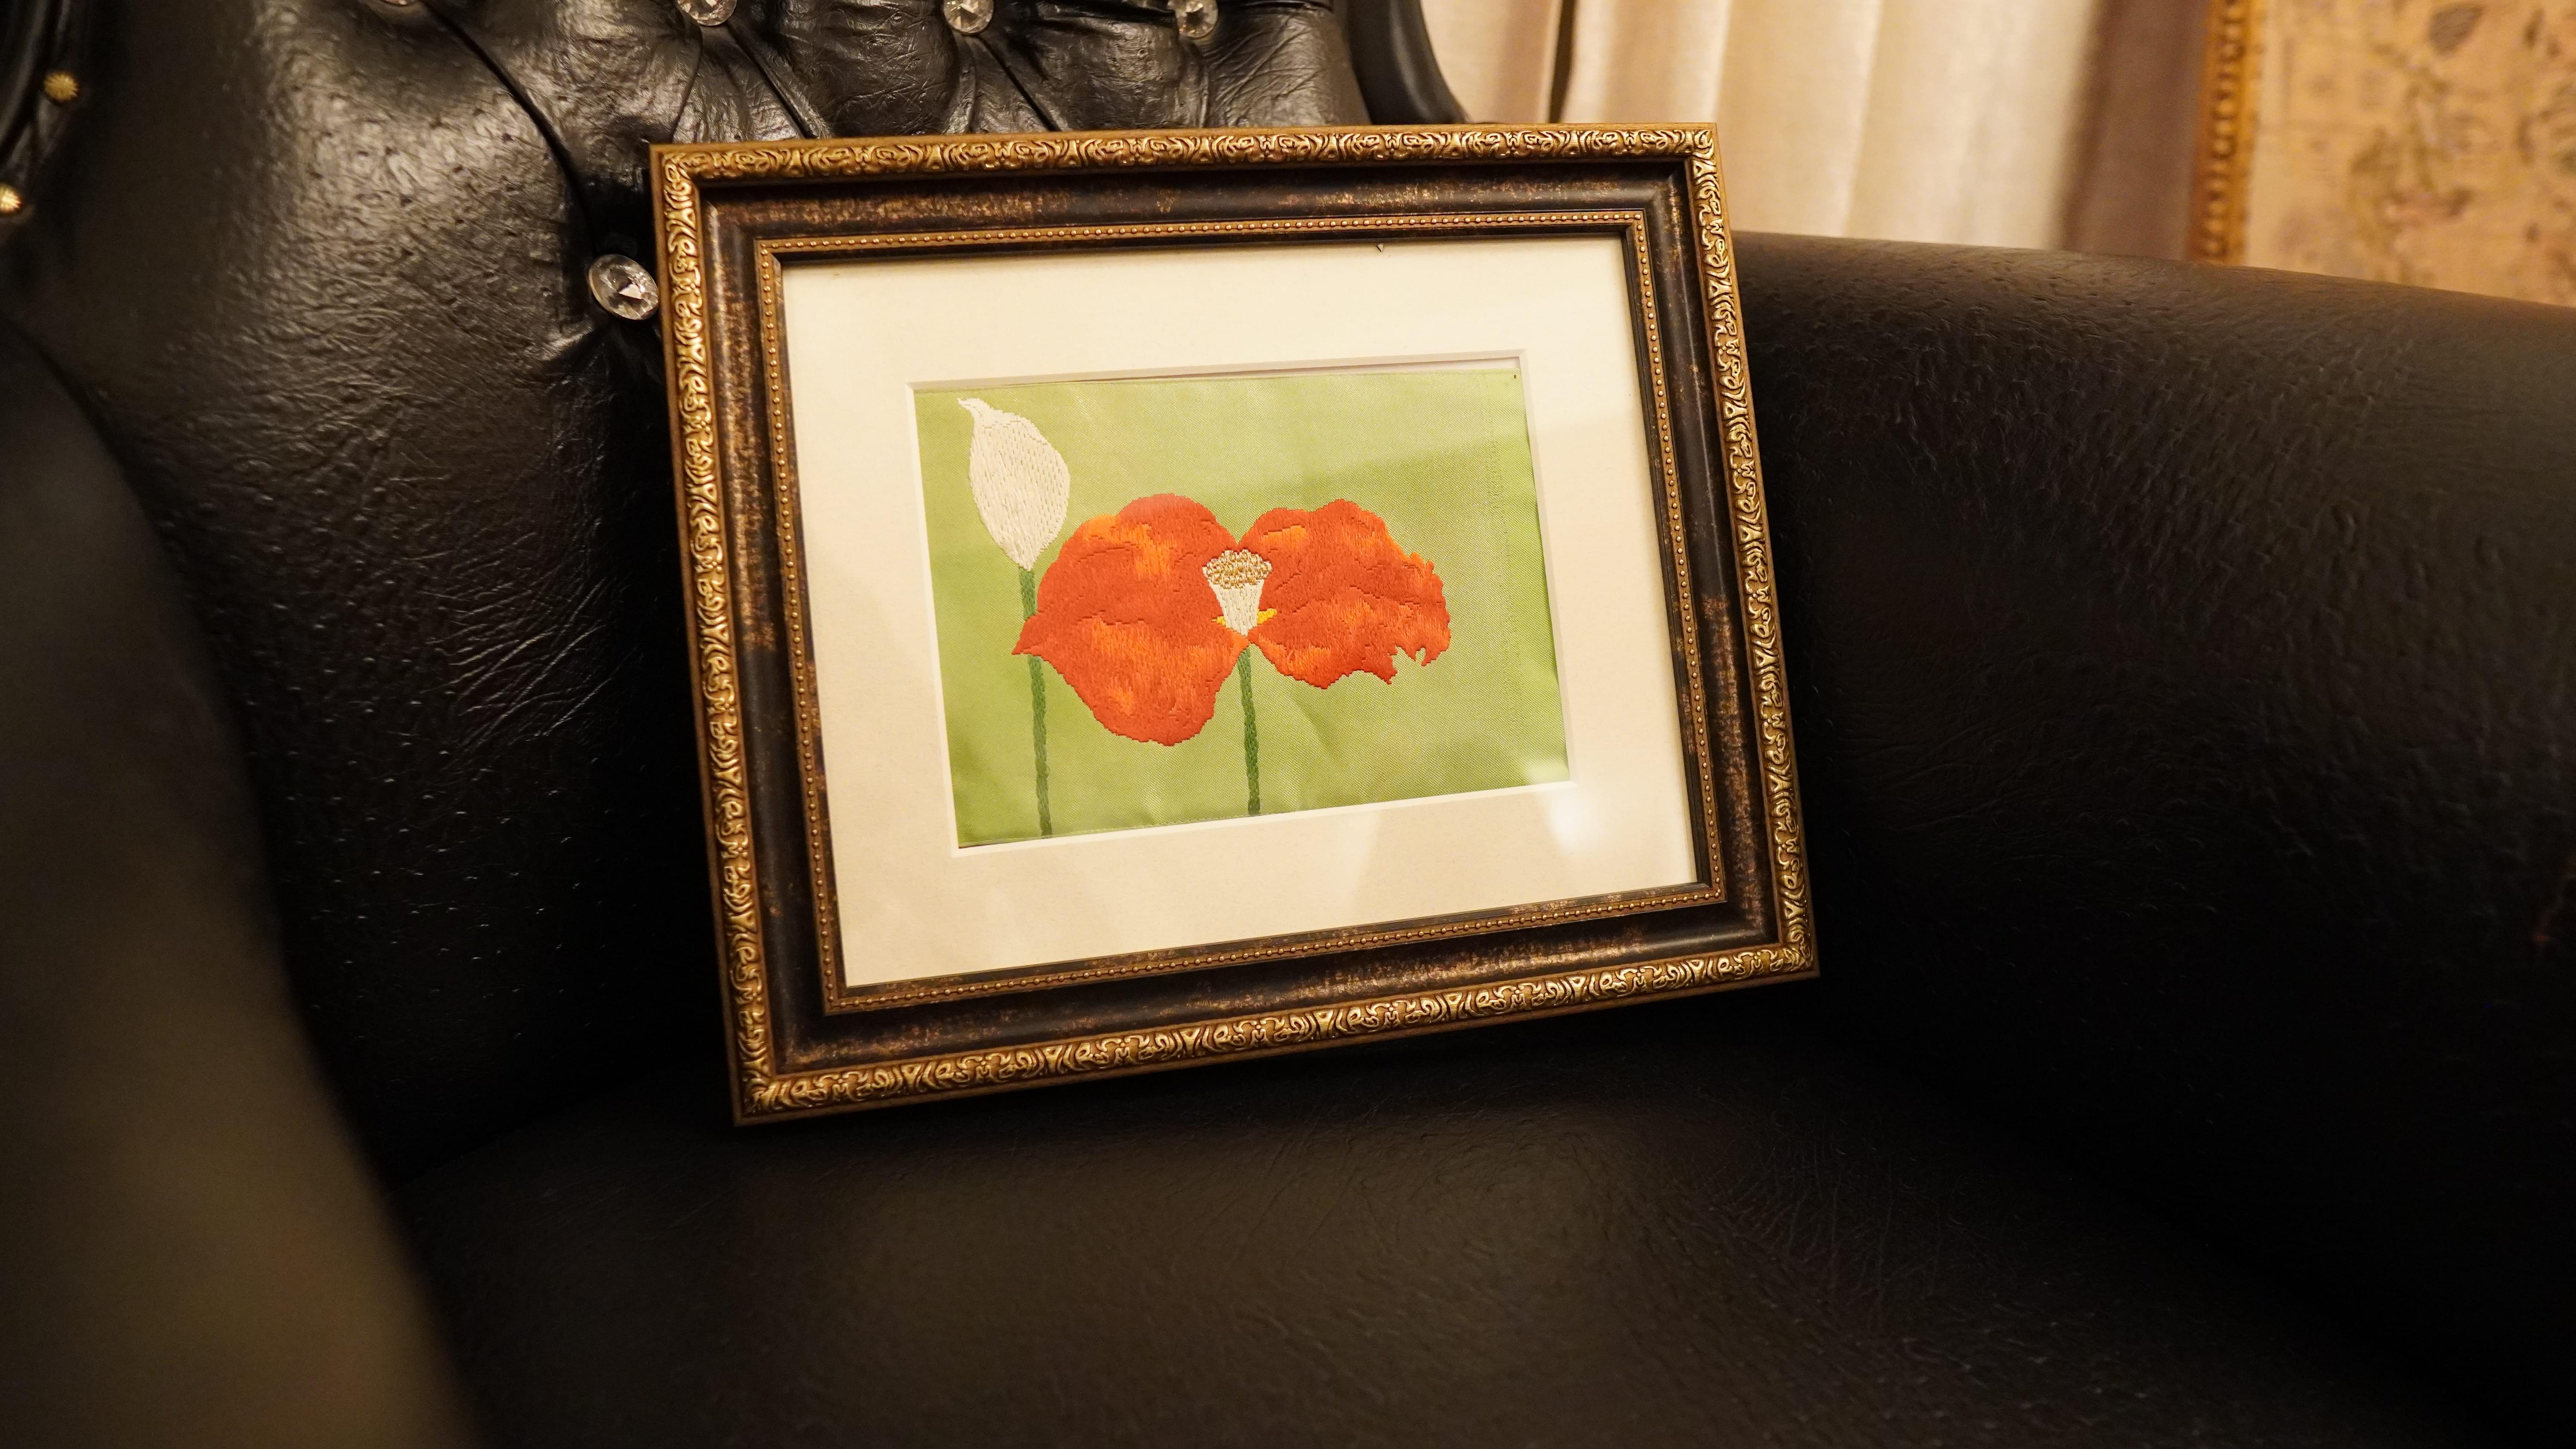 This work of art framed with a vintage Japanese kimono obi, is a striking piece of poppy flowers blooming beautifully amidst the bright greenery.

 Poppy flower is loved since ancient times under the name of “Hinageshi” in Japan. The red poppy